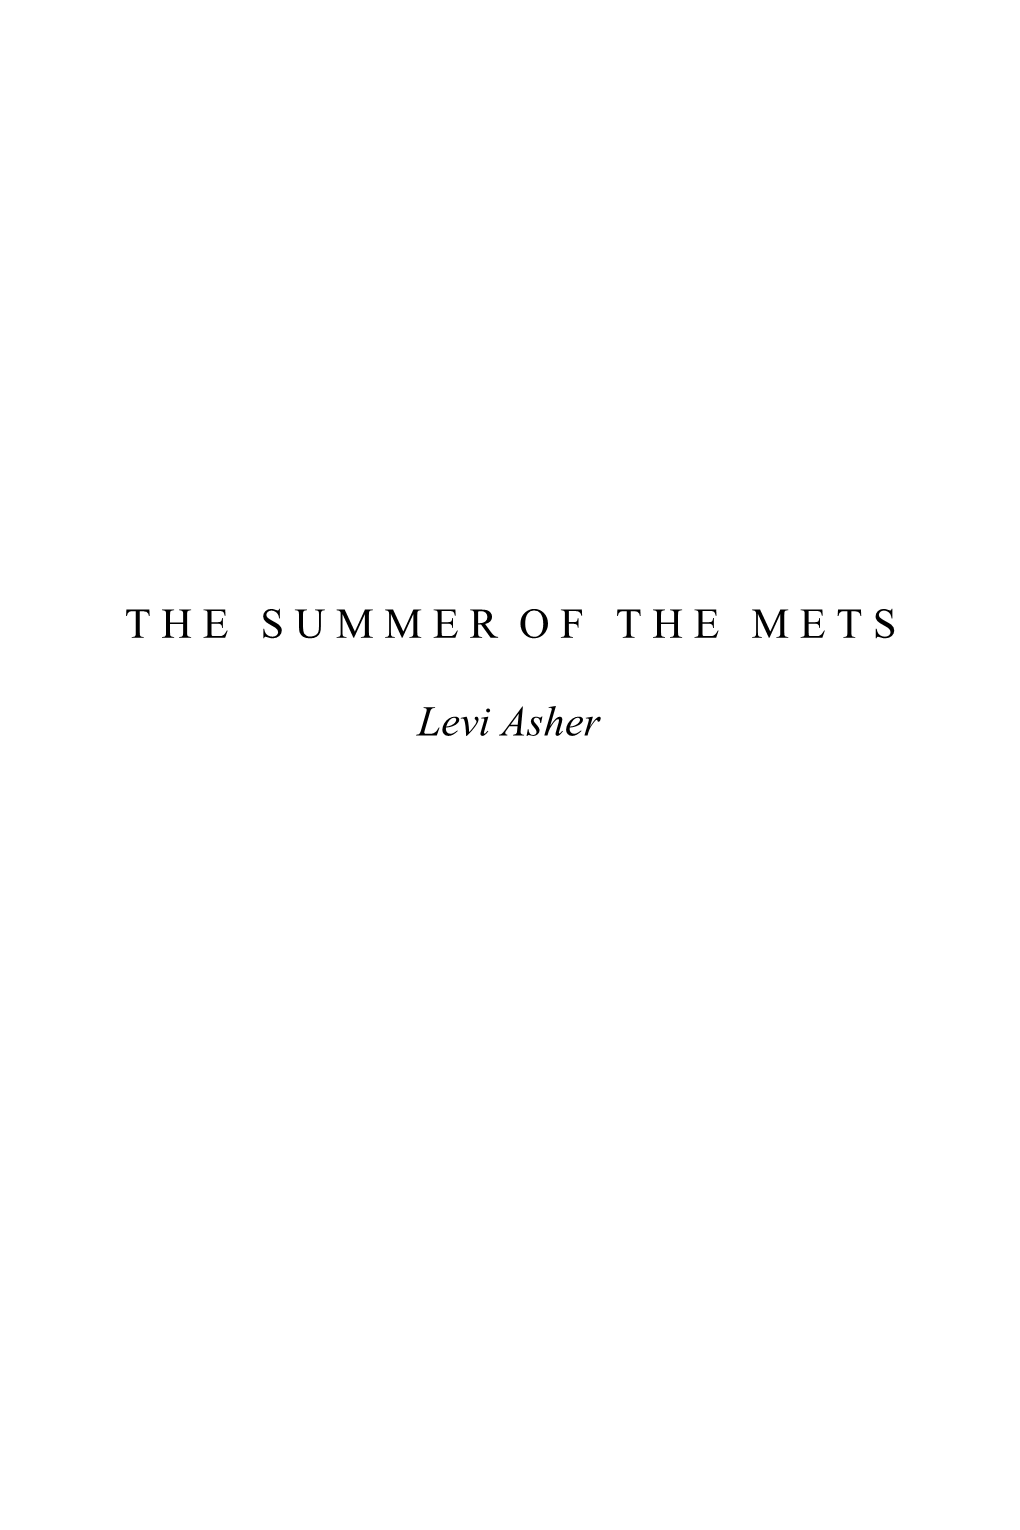 The Summer of the Mets